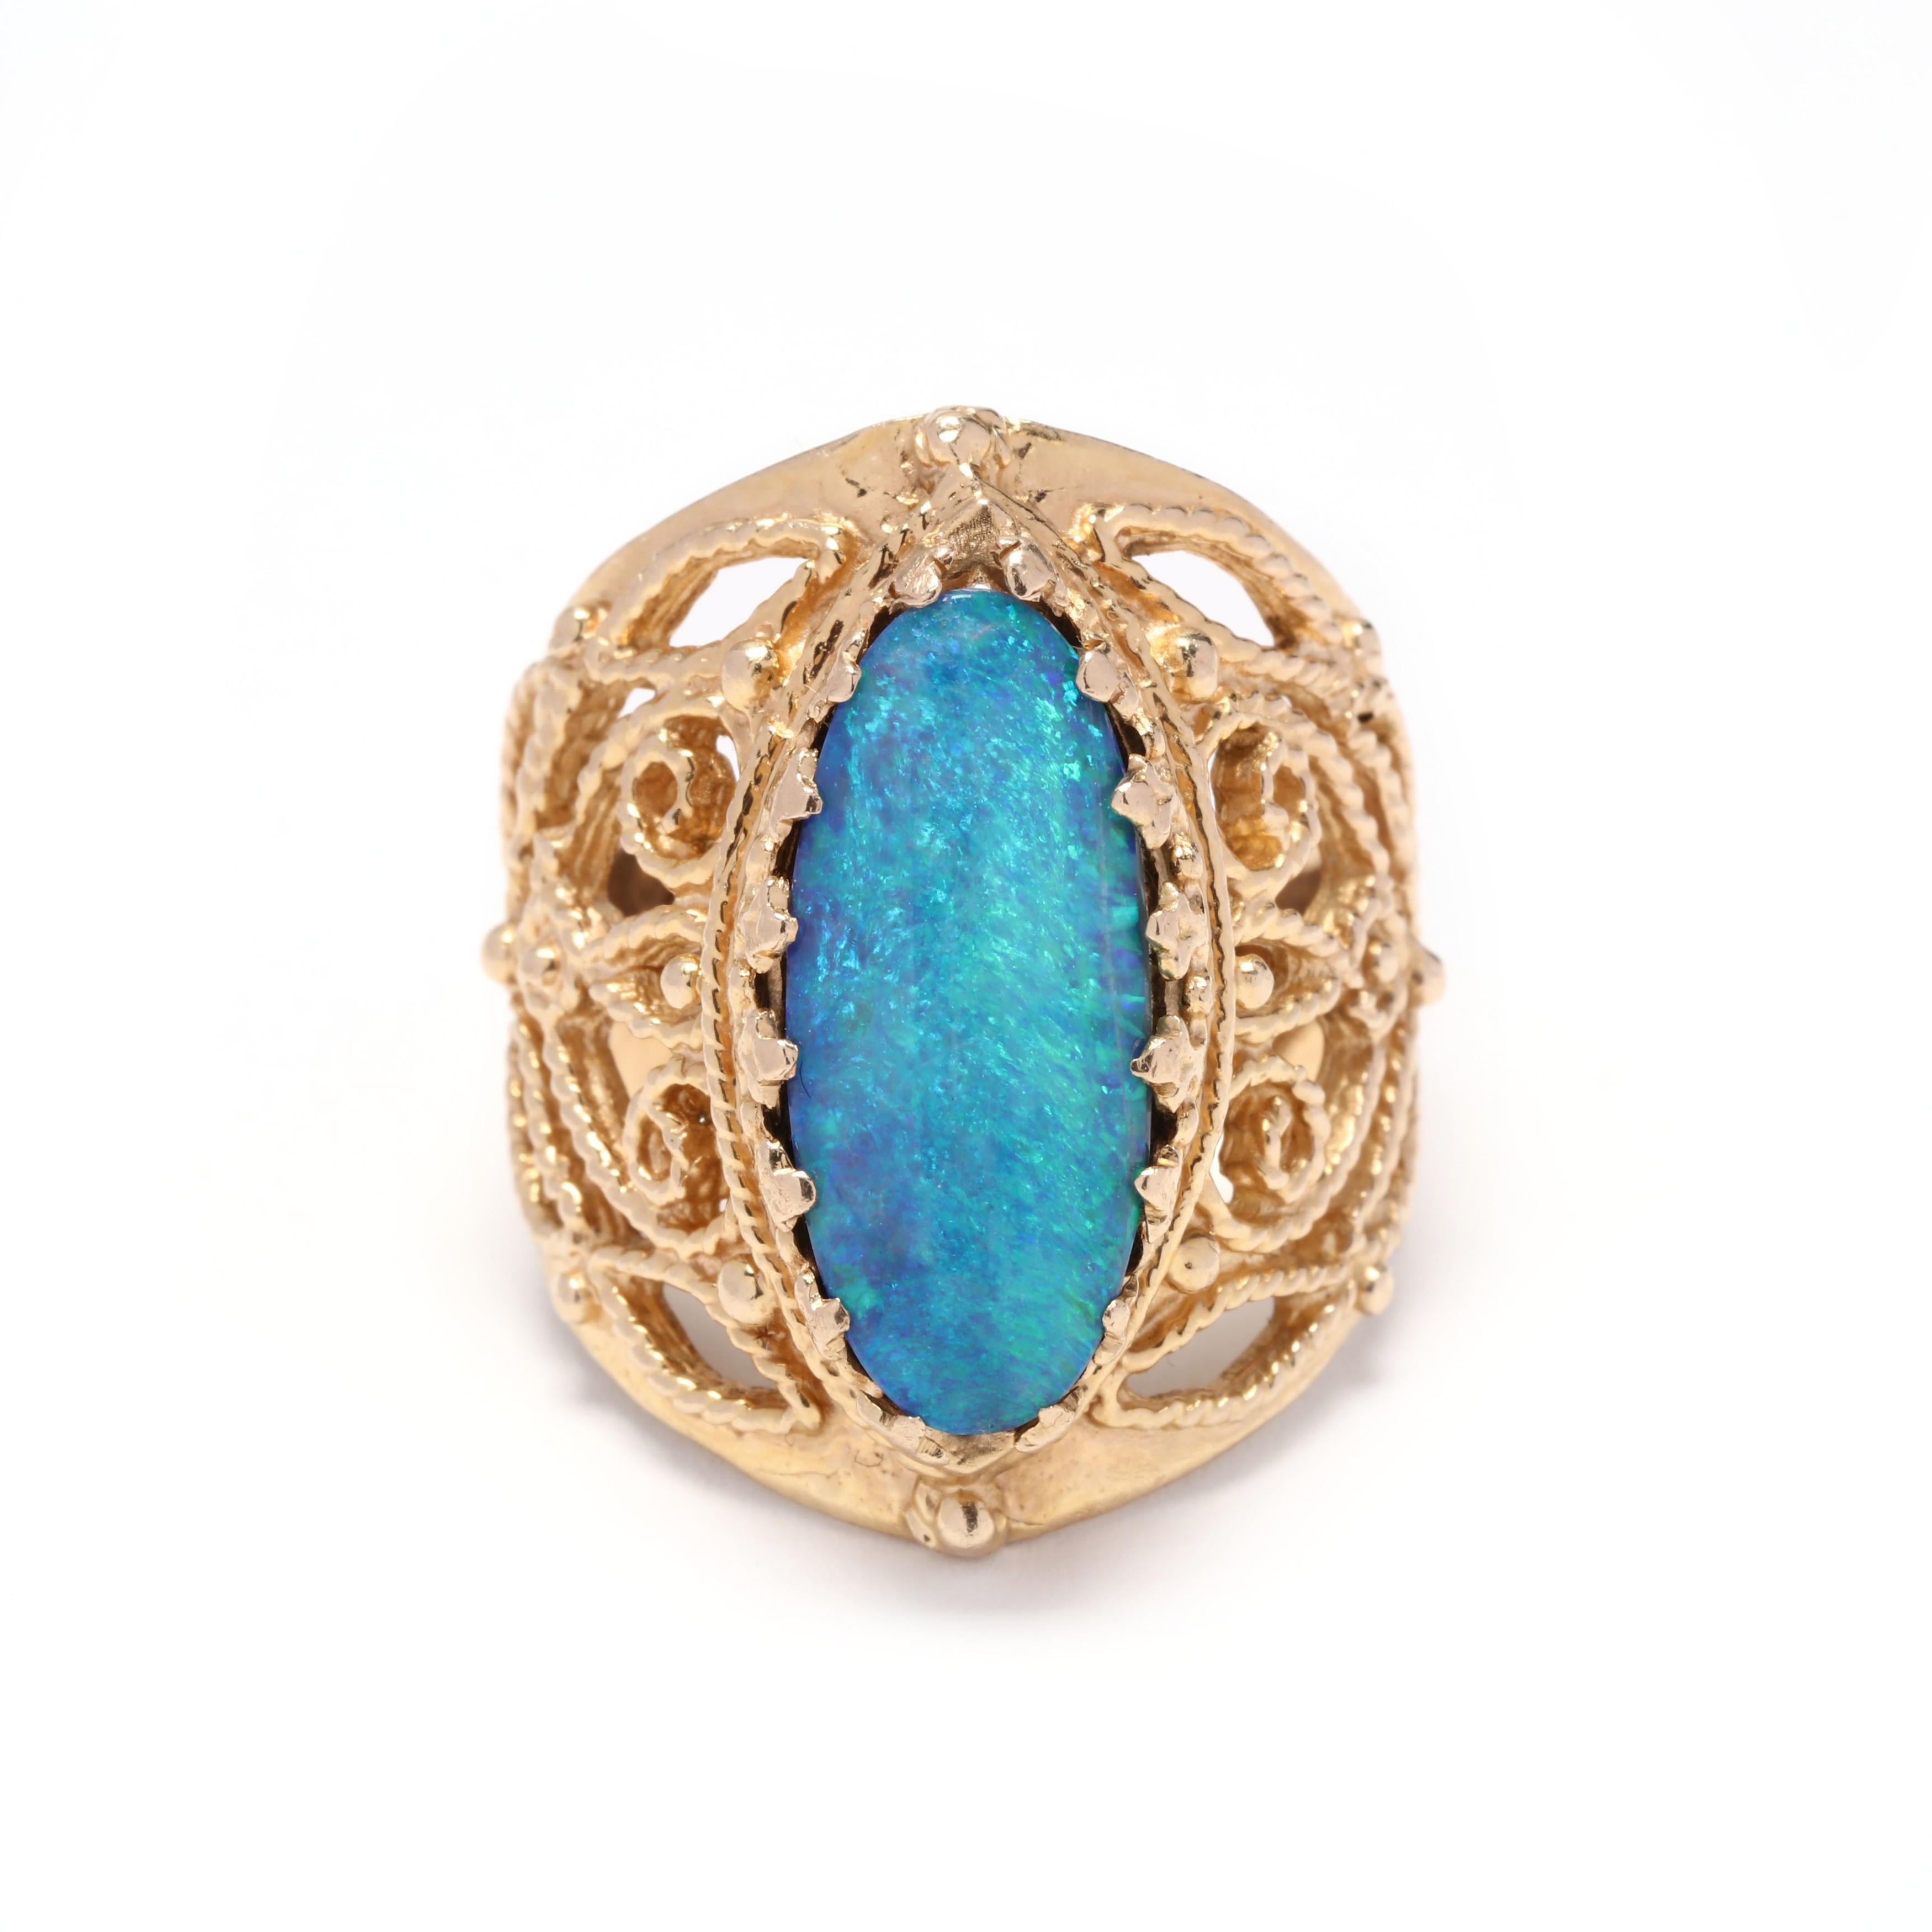 A vintage 14 karat yellow gold oval opal filigree navette statement ring. This ring features an oval cabochon cut opal with trefoil prongs and a rope motif filigree mounting.

Stones:

- opal, 1 stone

- oval cabochon

- 18.82 x 8.7 mm


Ring Size